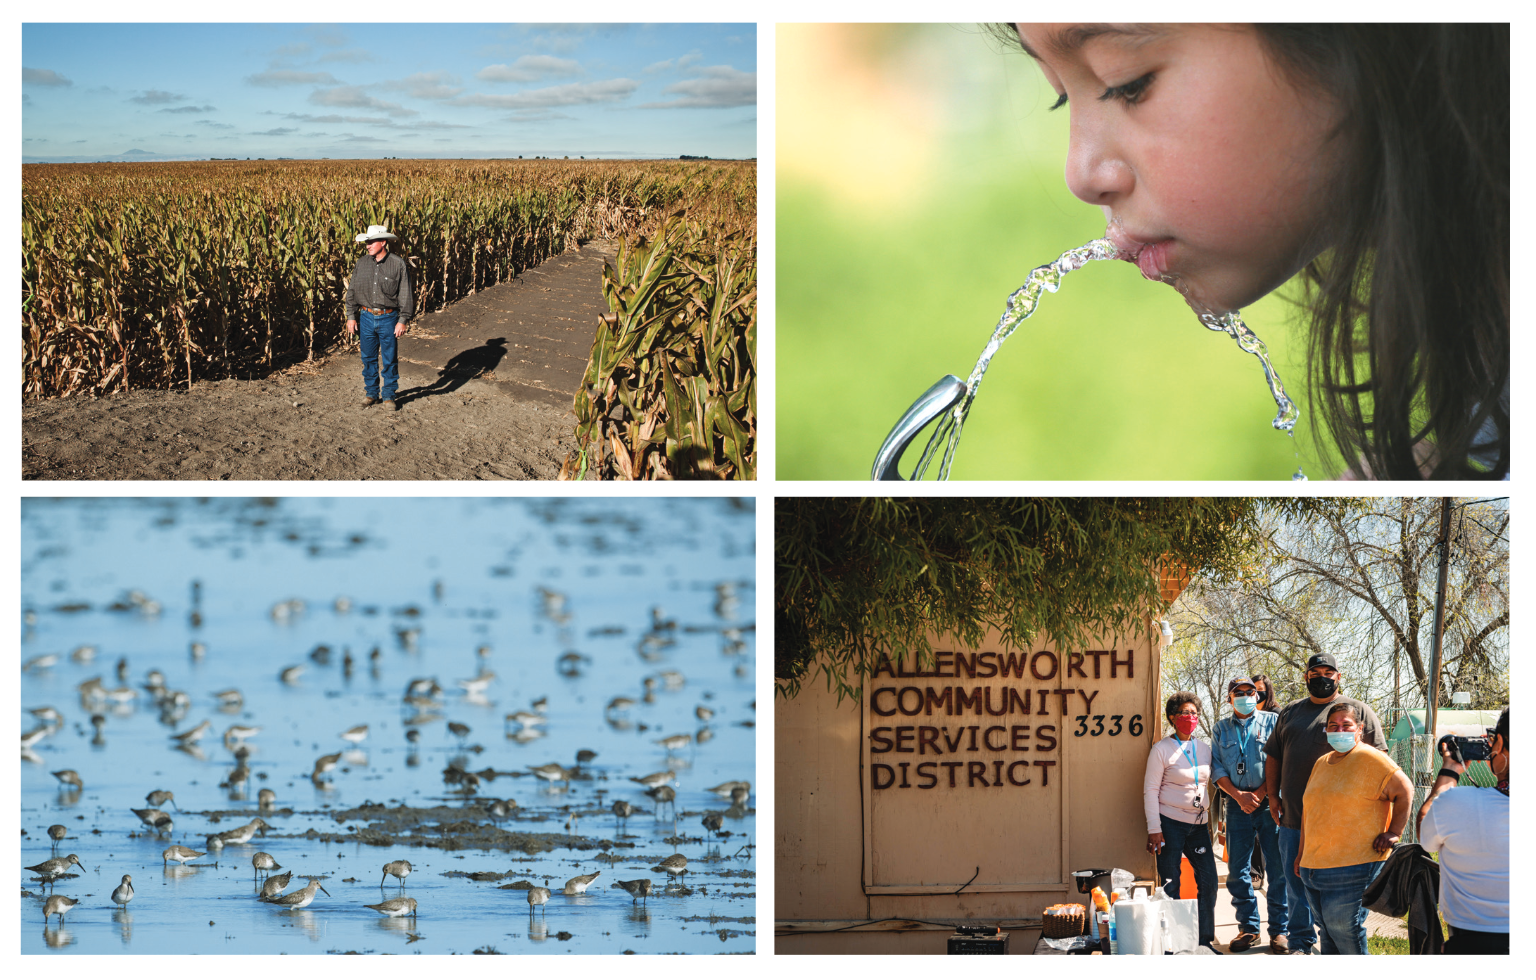 New Report Addresses Findings That Most California Groundwater Sustainability Plans Fail to Protect Vulnerable Communities and the Environment